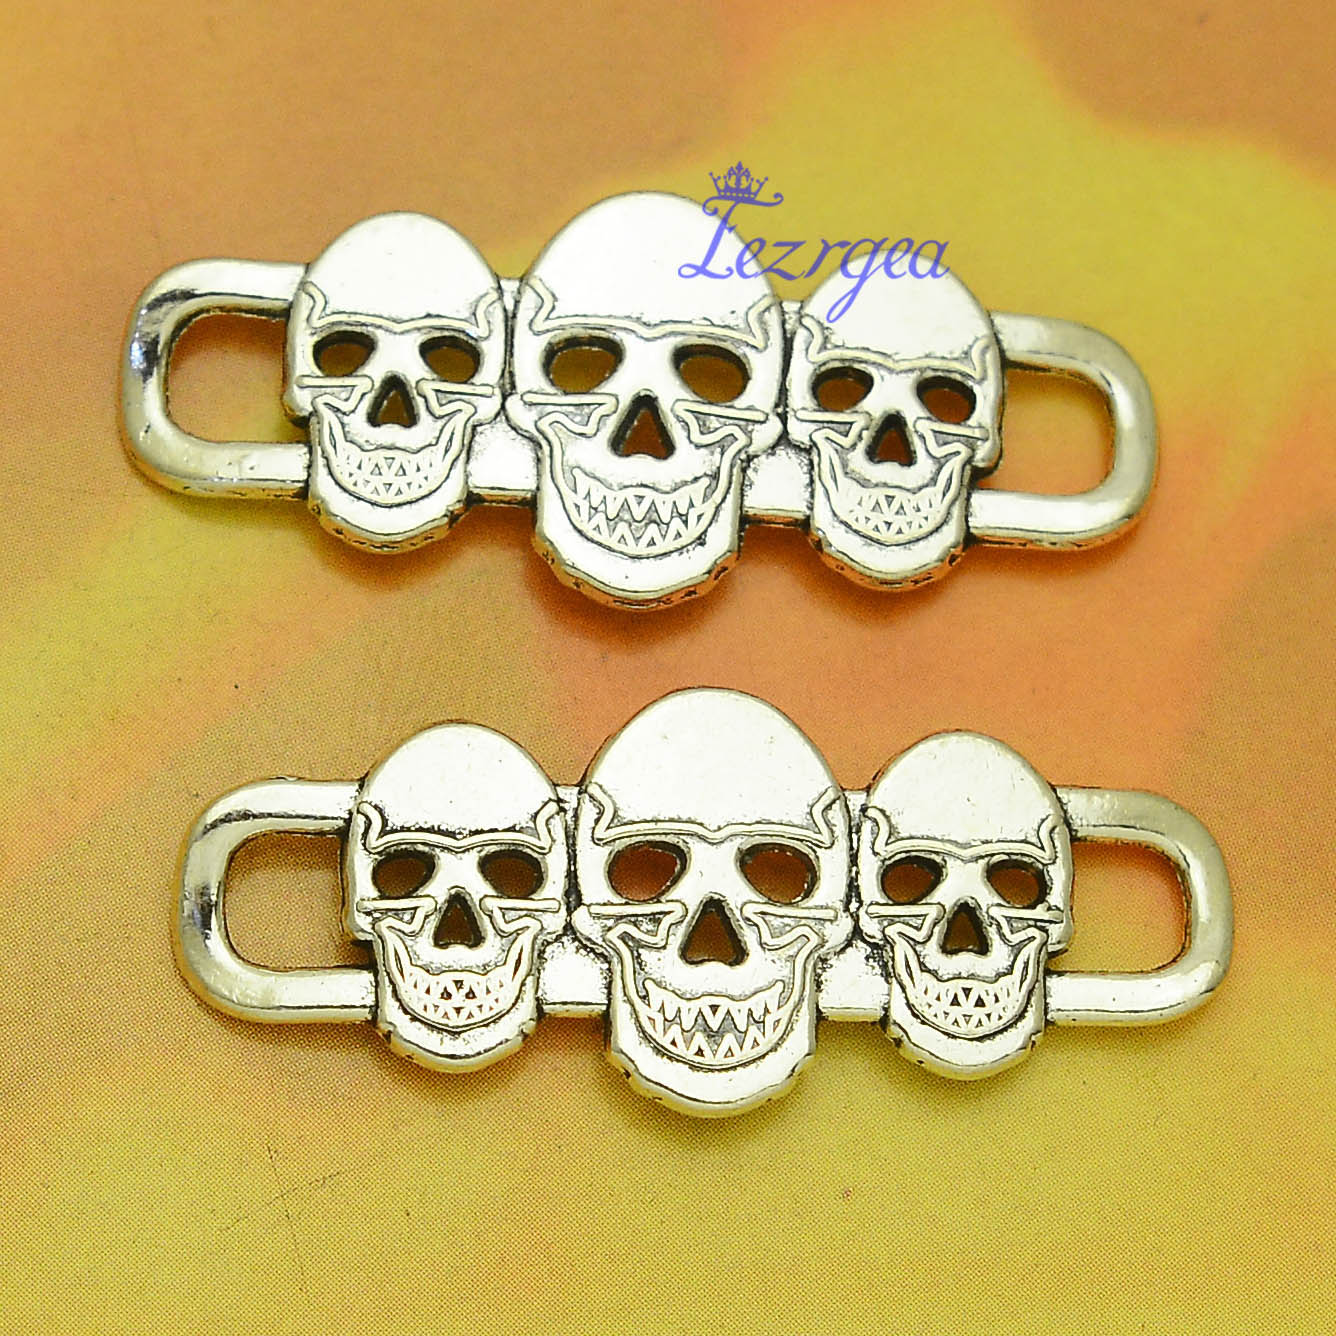 10pcs/lot--16x39mm, Antique silver plated skull connector charms ,DIY supplies, Jewelry accessories